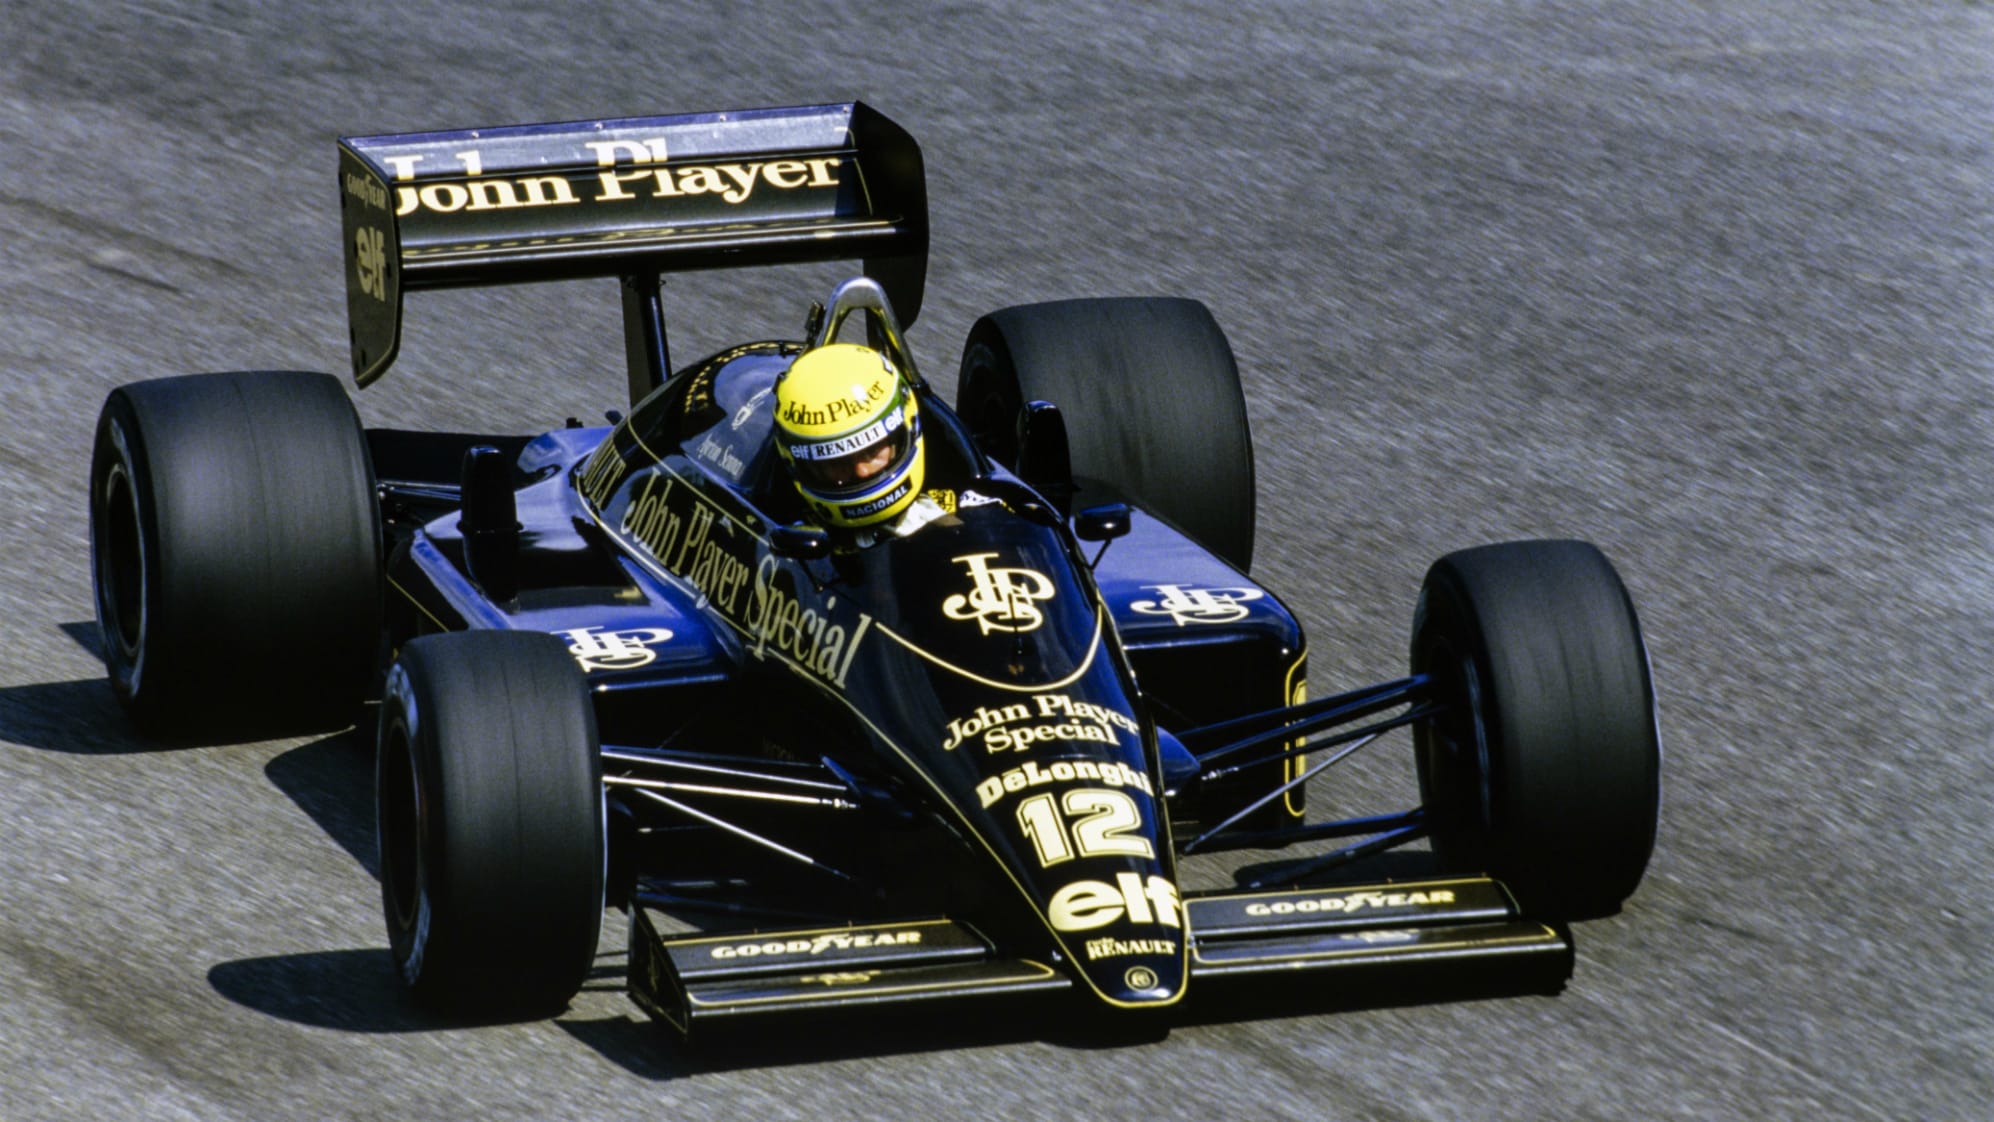 Which is the best looking blackandgold car in F1 history? Formula 1®